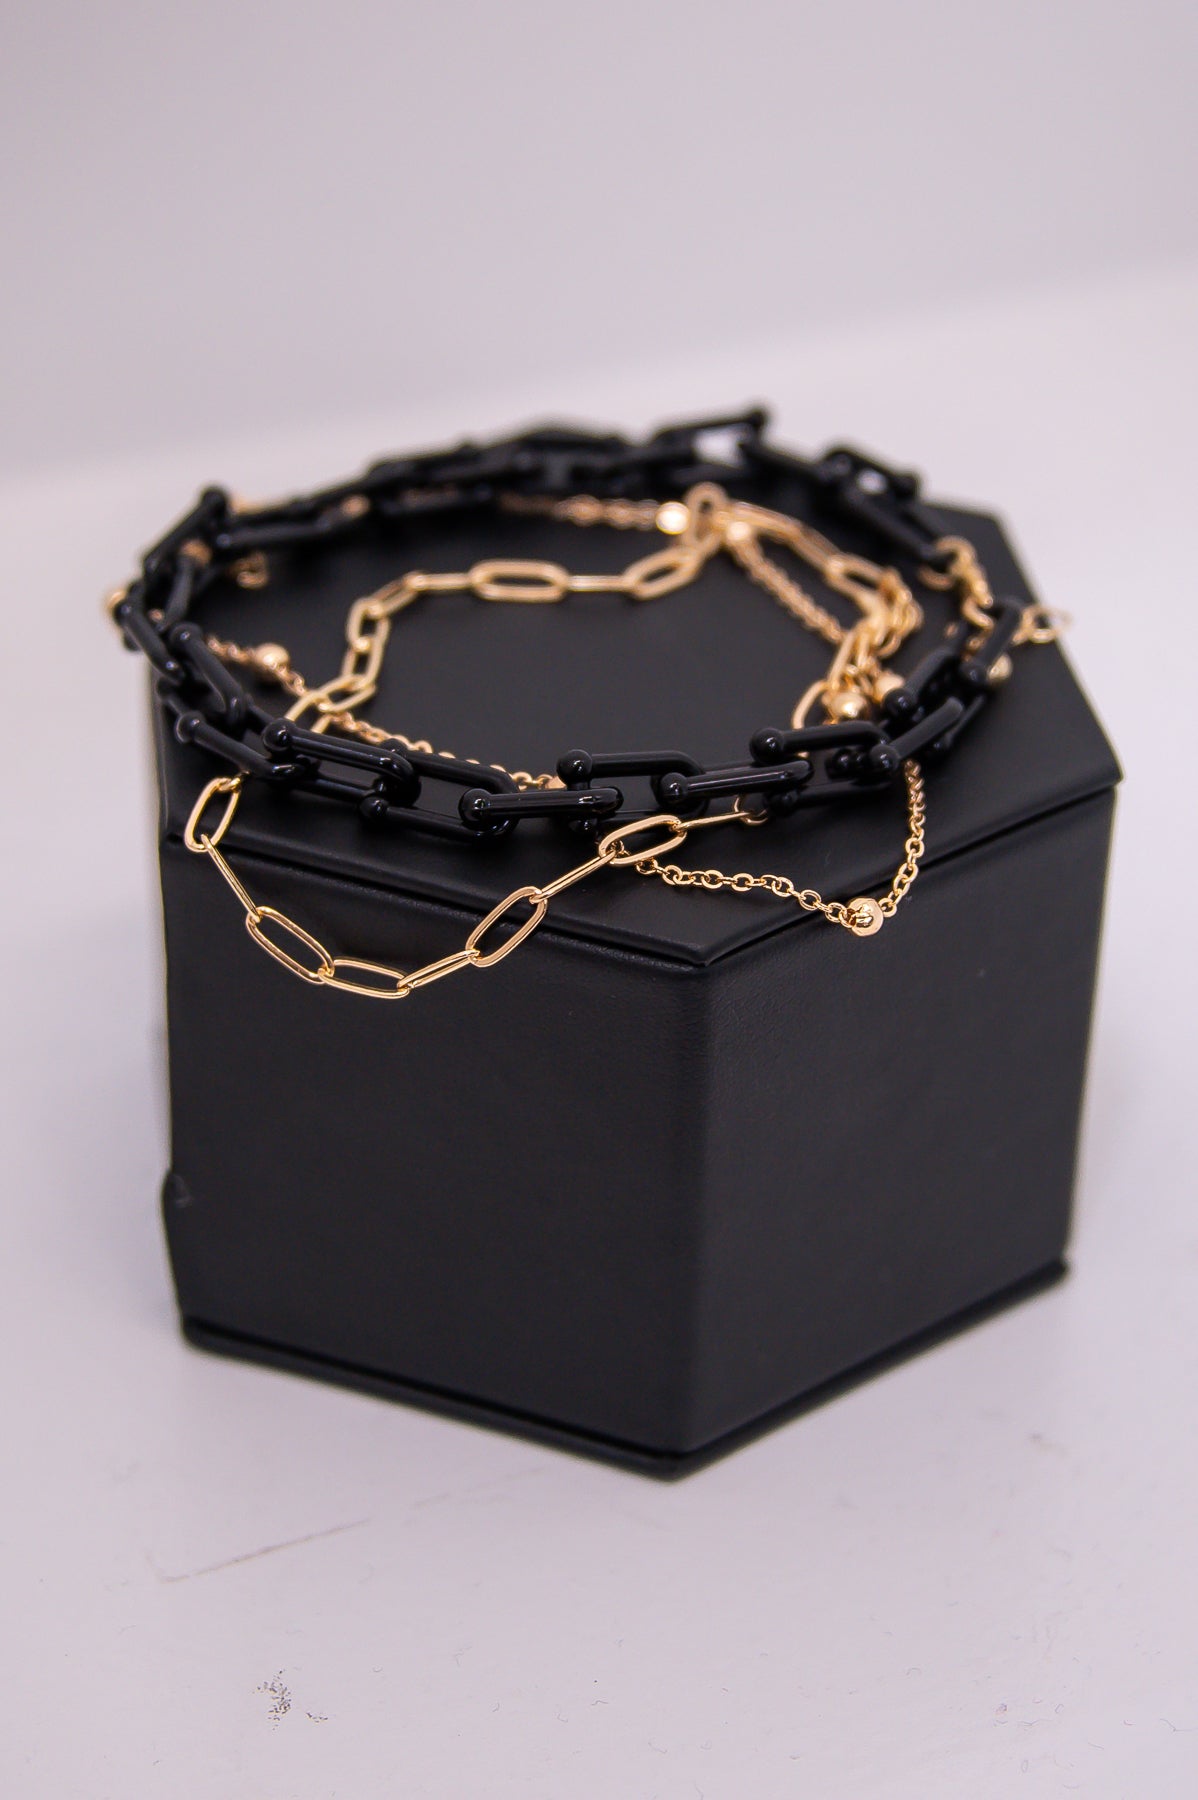 Black/Gold Layered Chain Anklets - ANK003BK